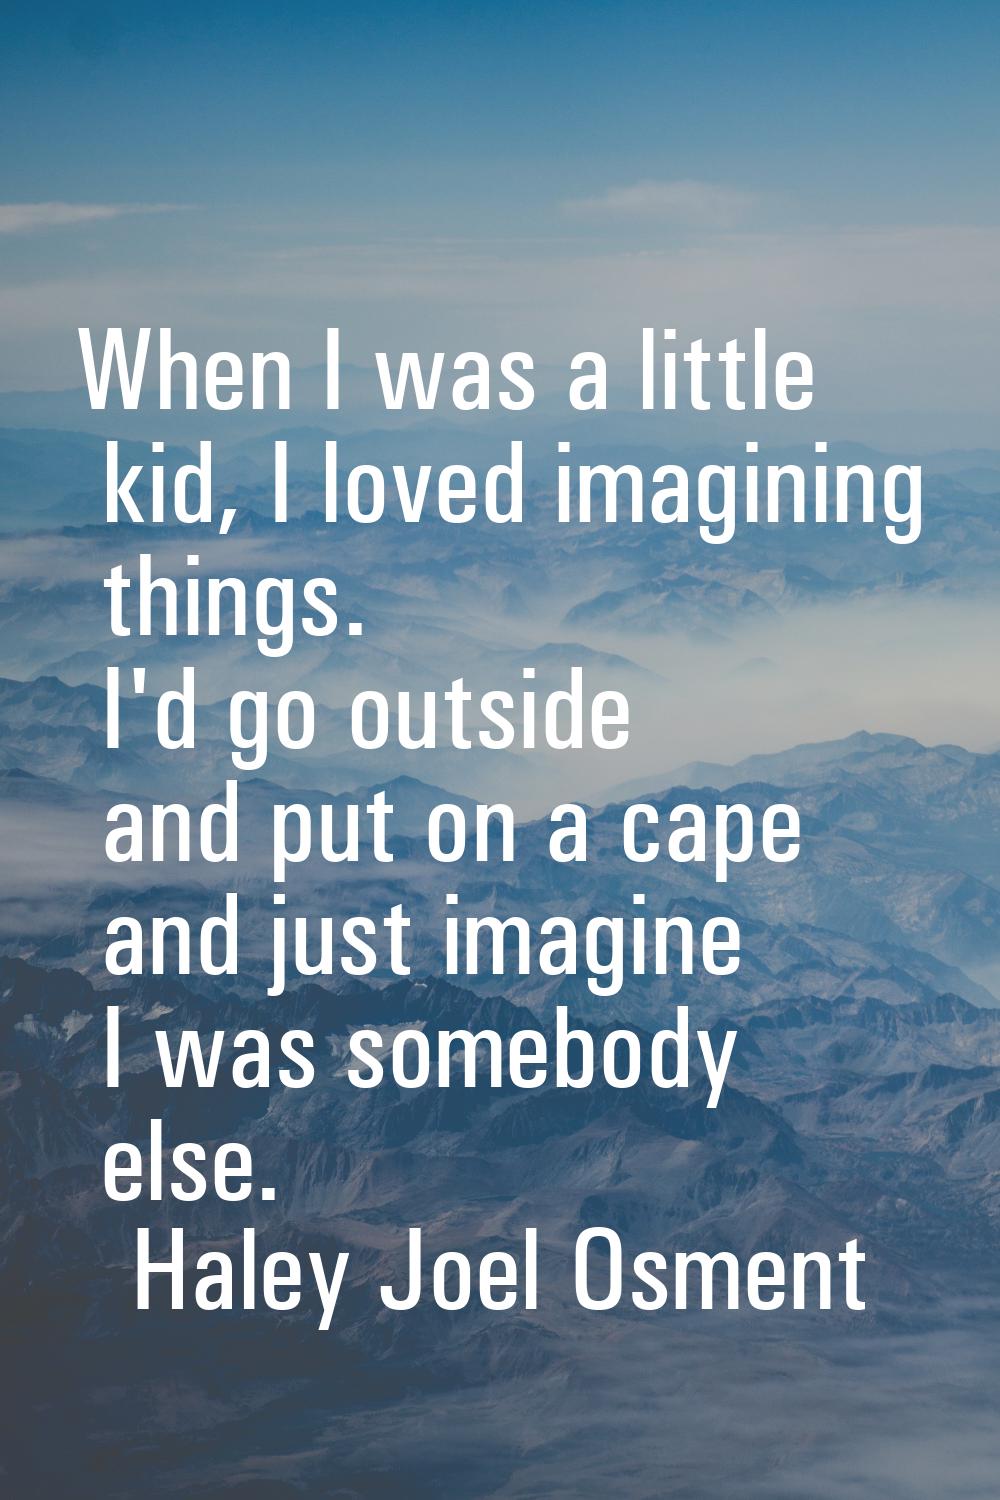 When I was a little kid, I loved imagining things. I'd go outside and put on a cape and just imagin